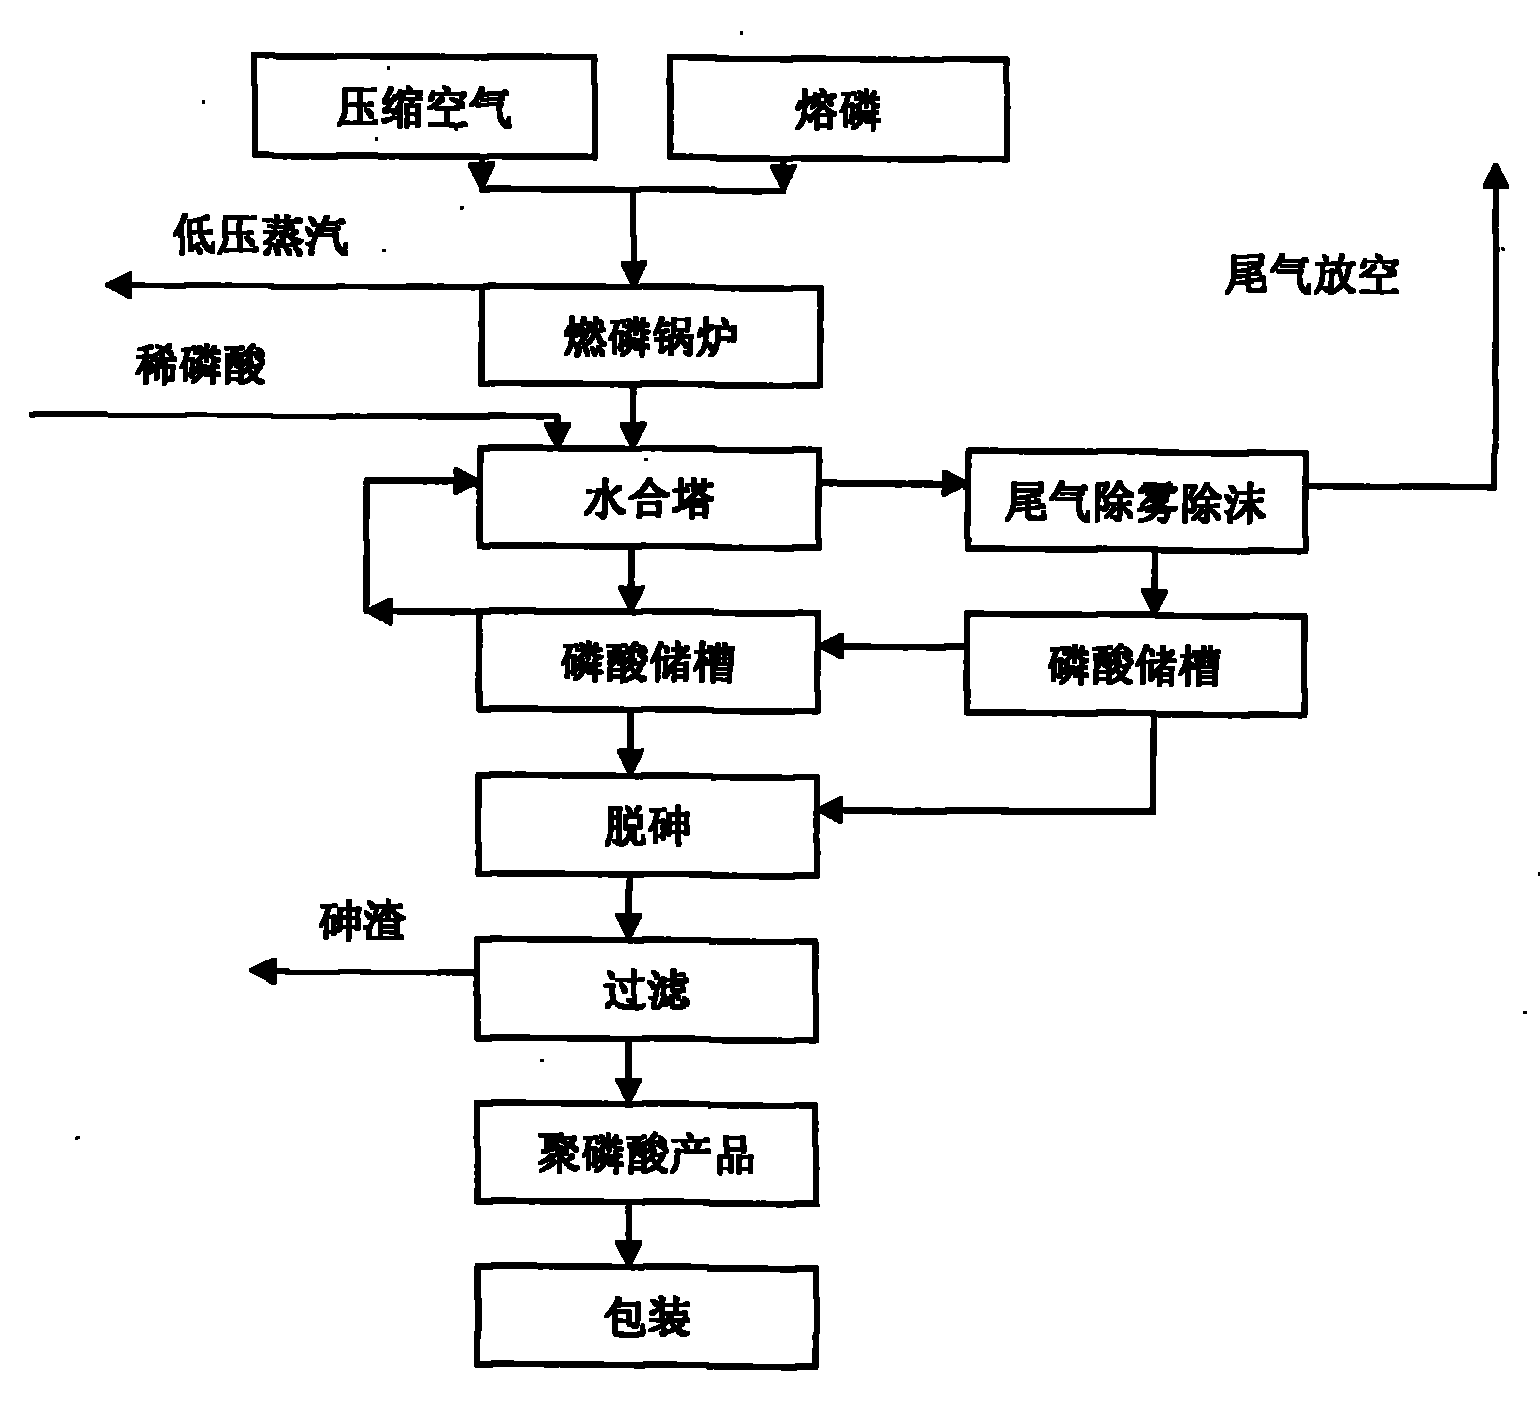 Method for using phosphoric oxide to concentrate diluted phosphoric acid to prepare polyphosphoric acid